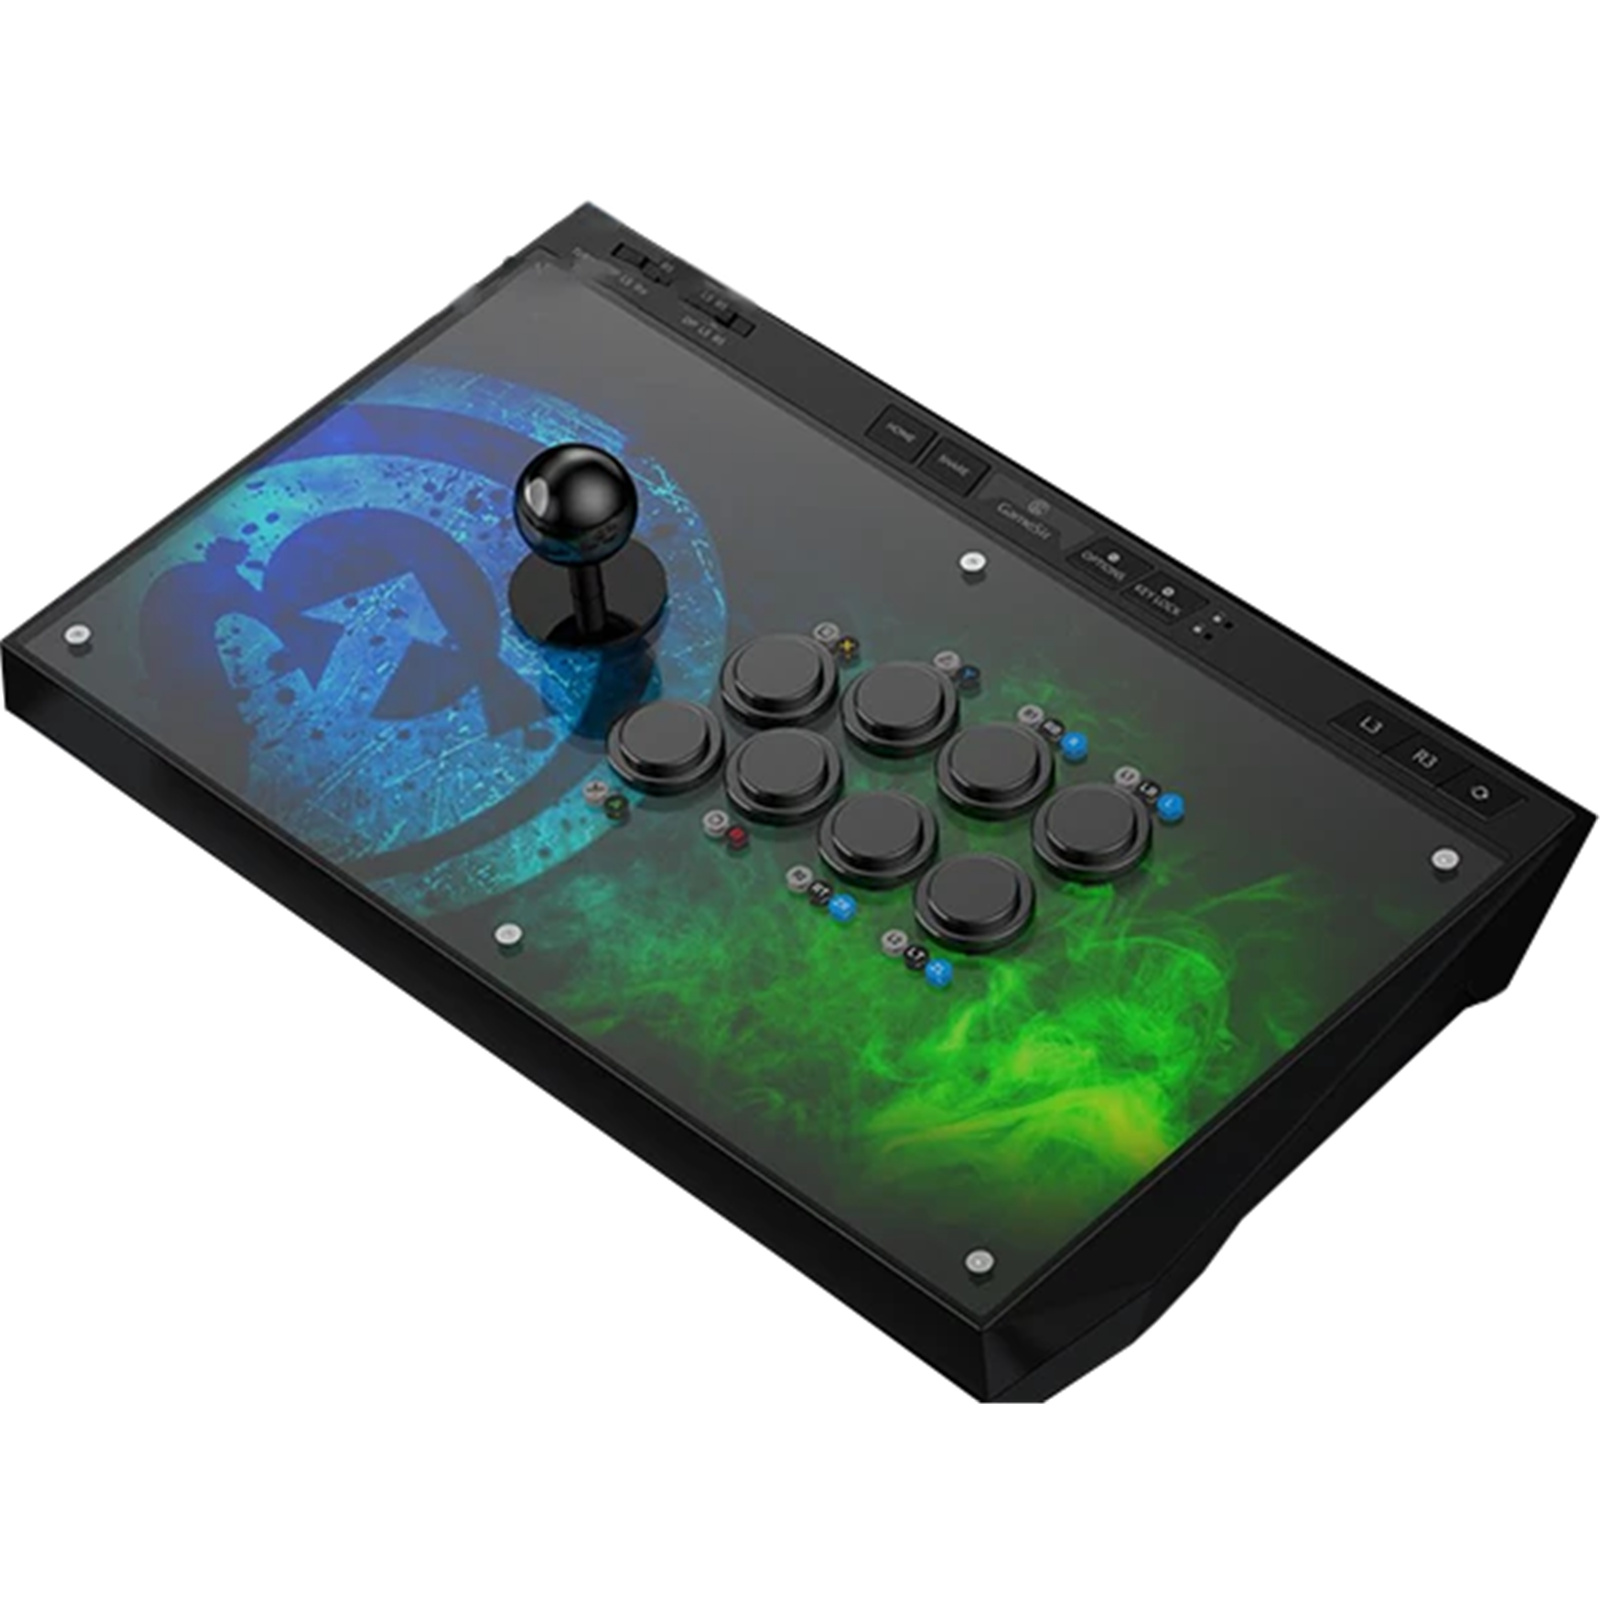 GameSir C2 Arcade Fight Stick Joystick -- for Xbox One, Playstation 4,  Windows PC and Android Device